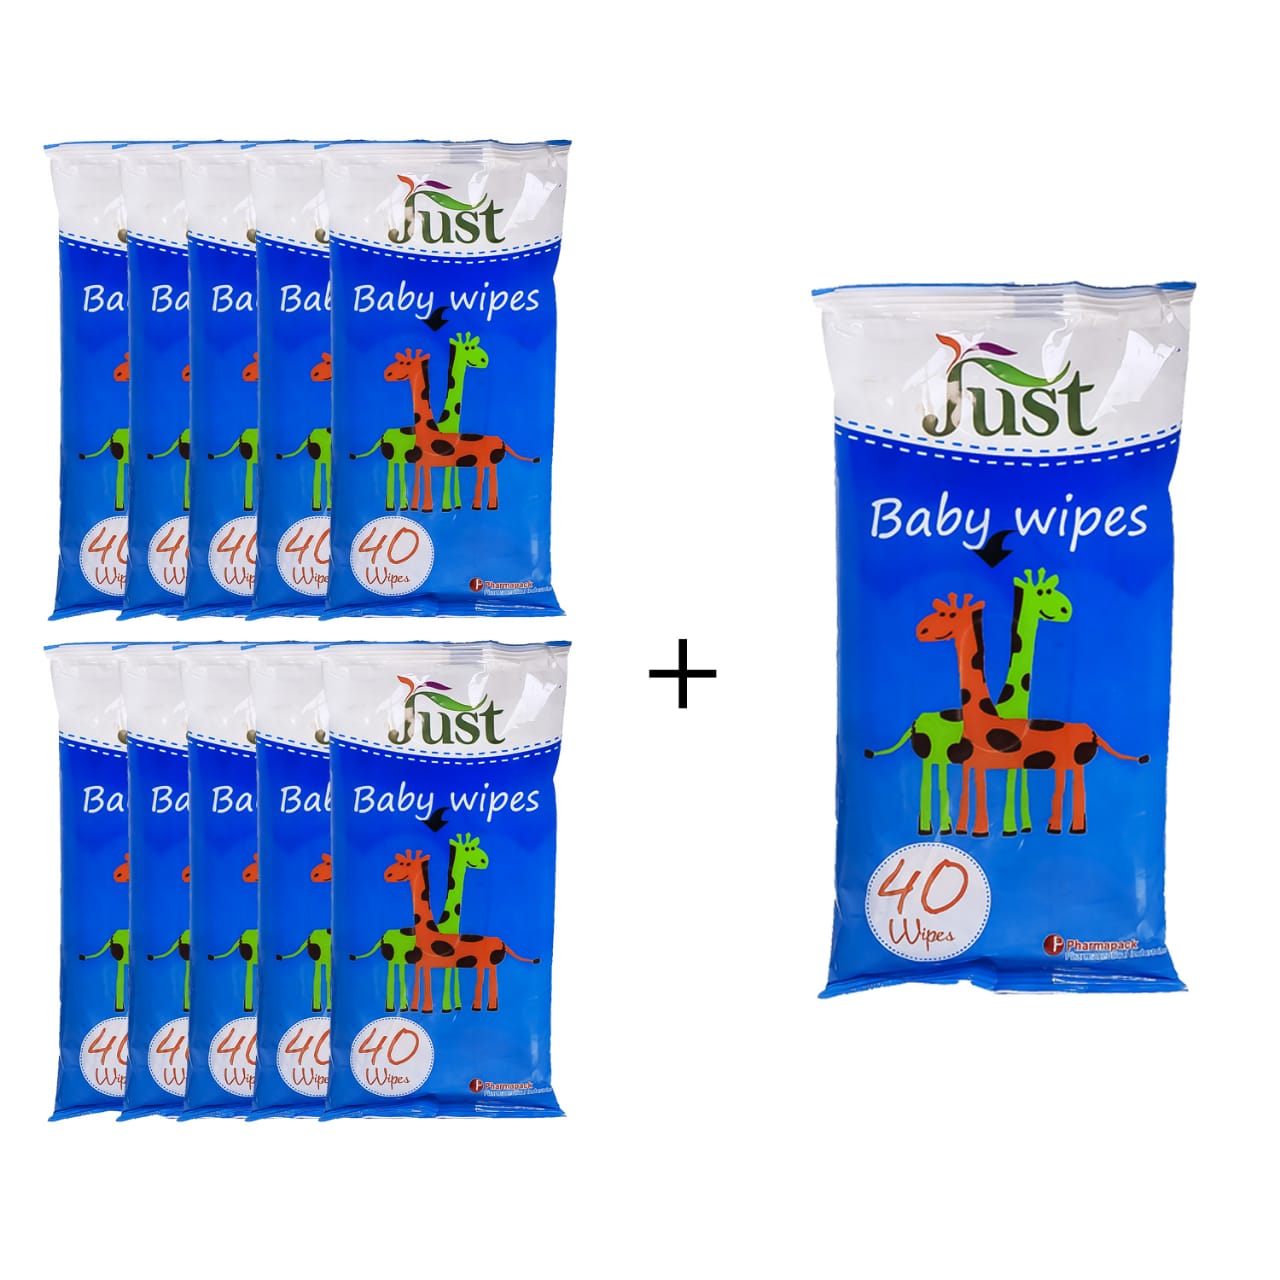 Just wet wipes ( 40 ) Offer